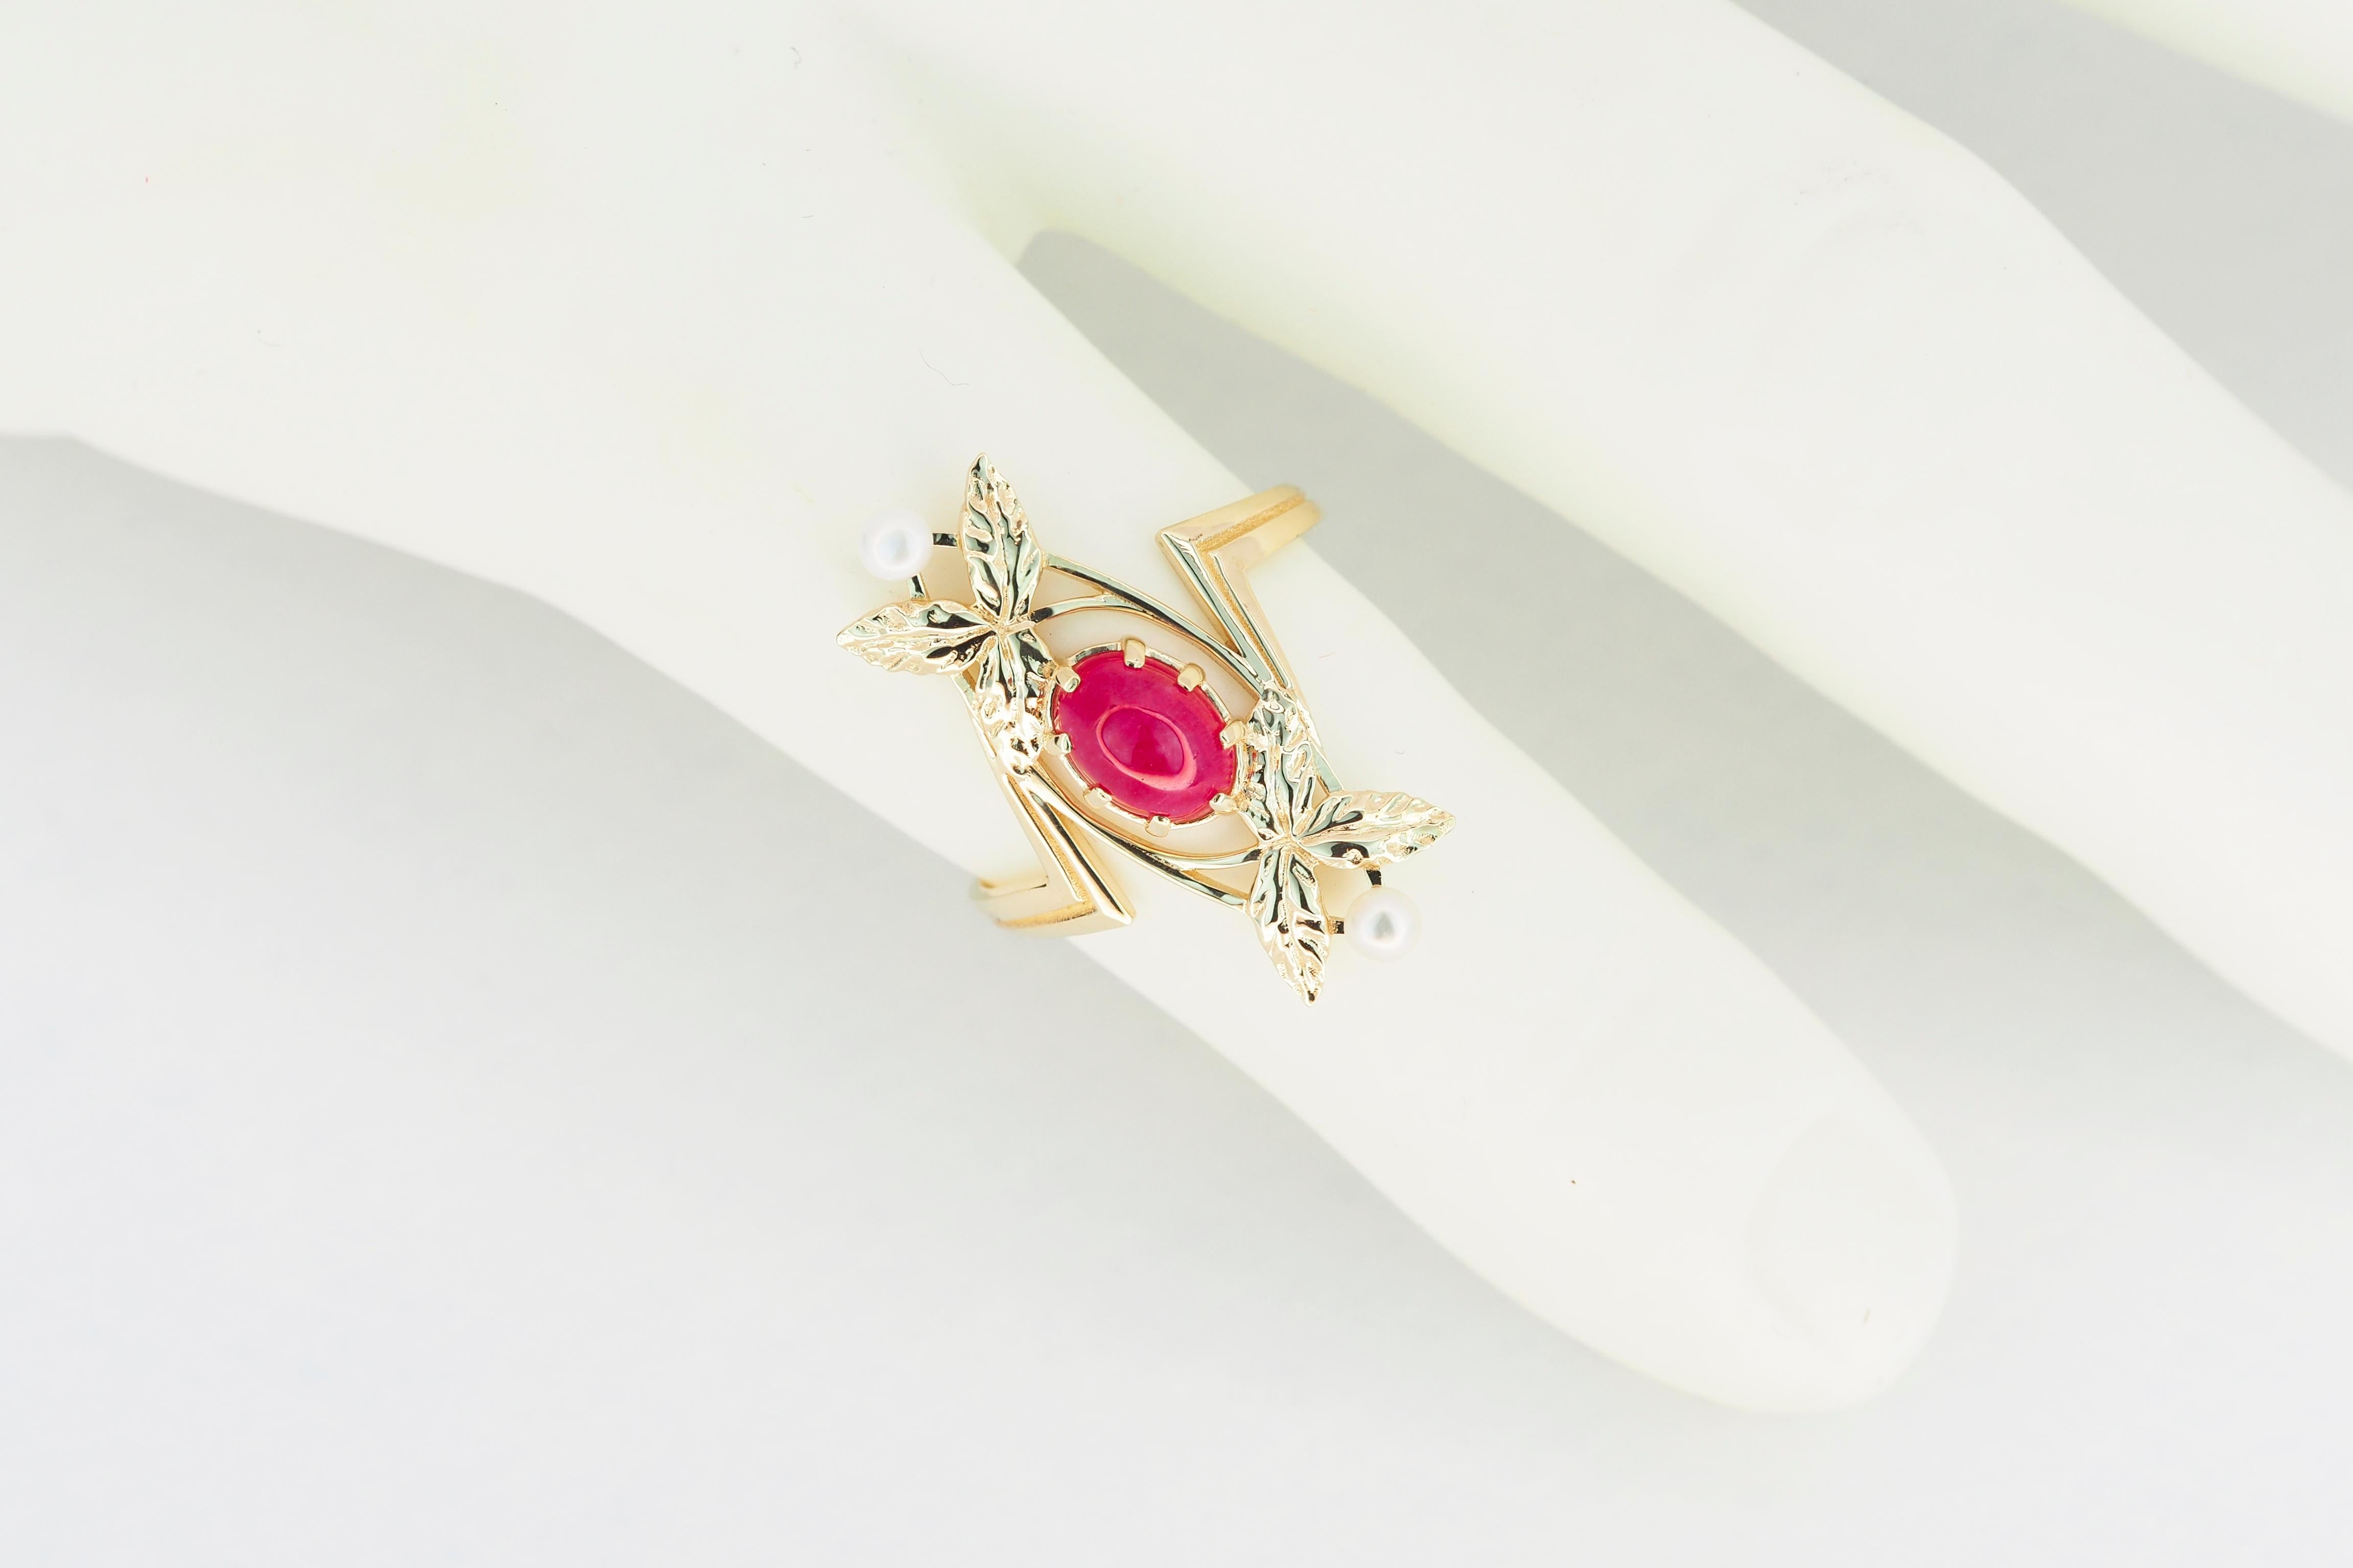 14k Gold Ring with Ruby and Pearls, Vintage Style Ring with Ruby 1